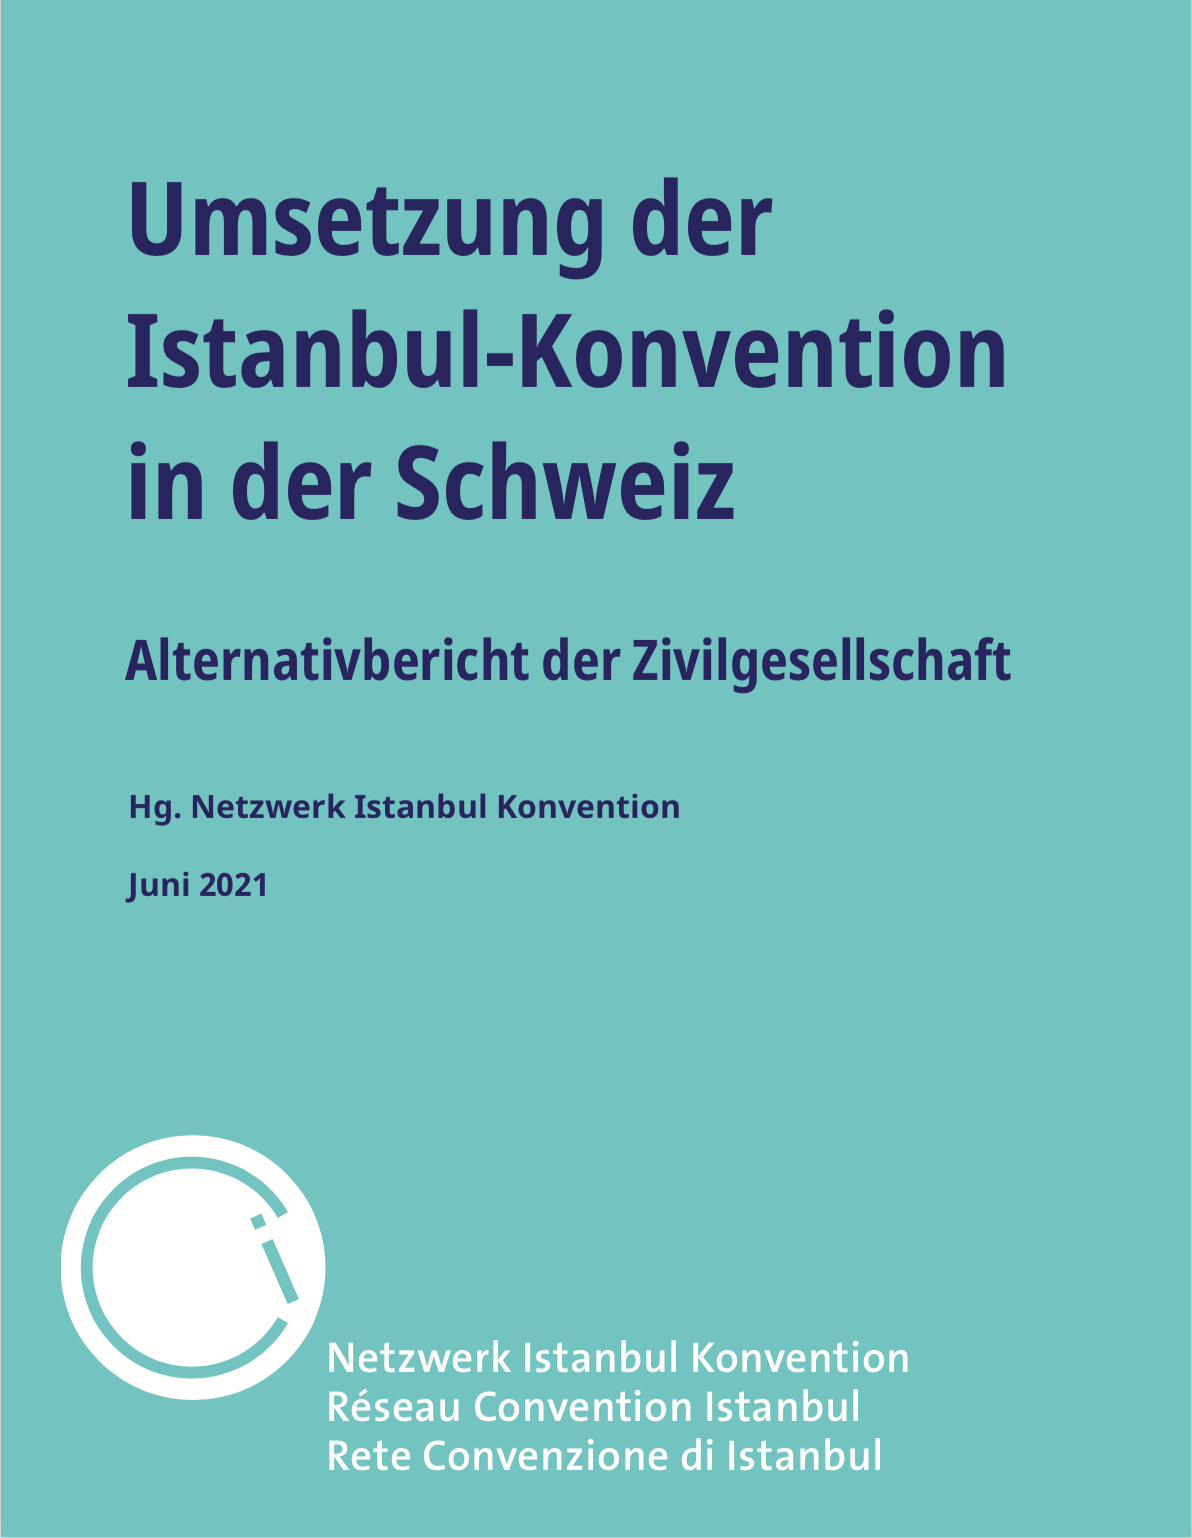 Convention of Istambul